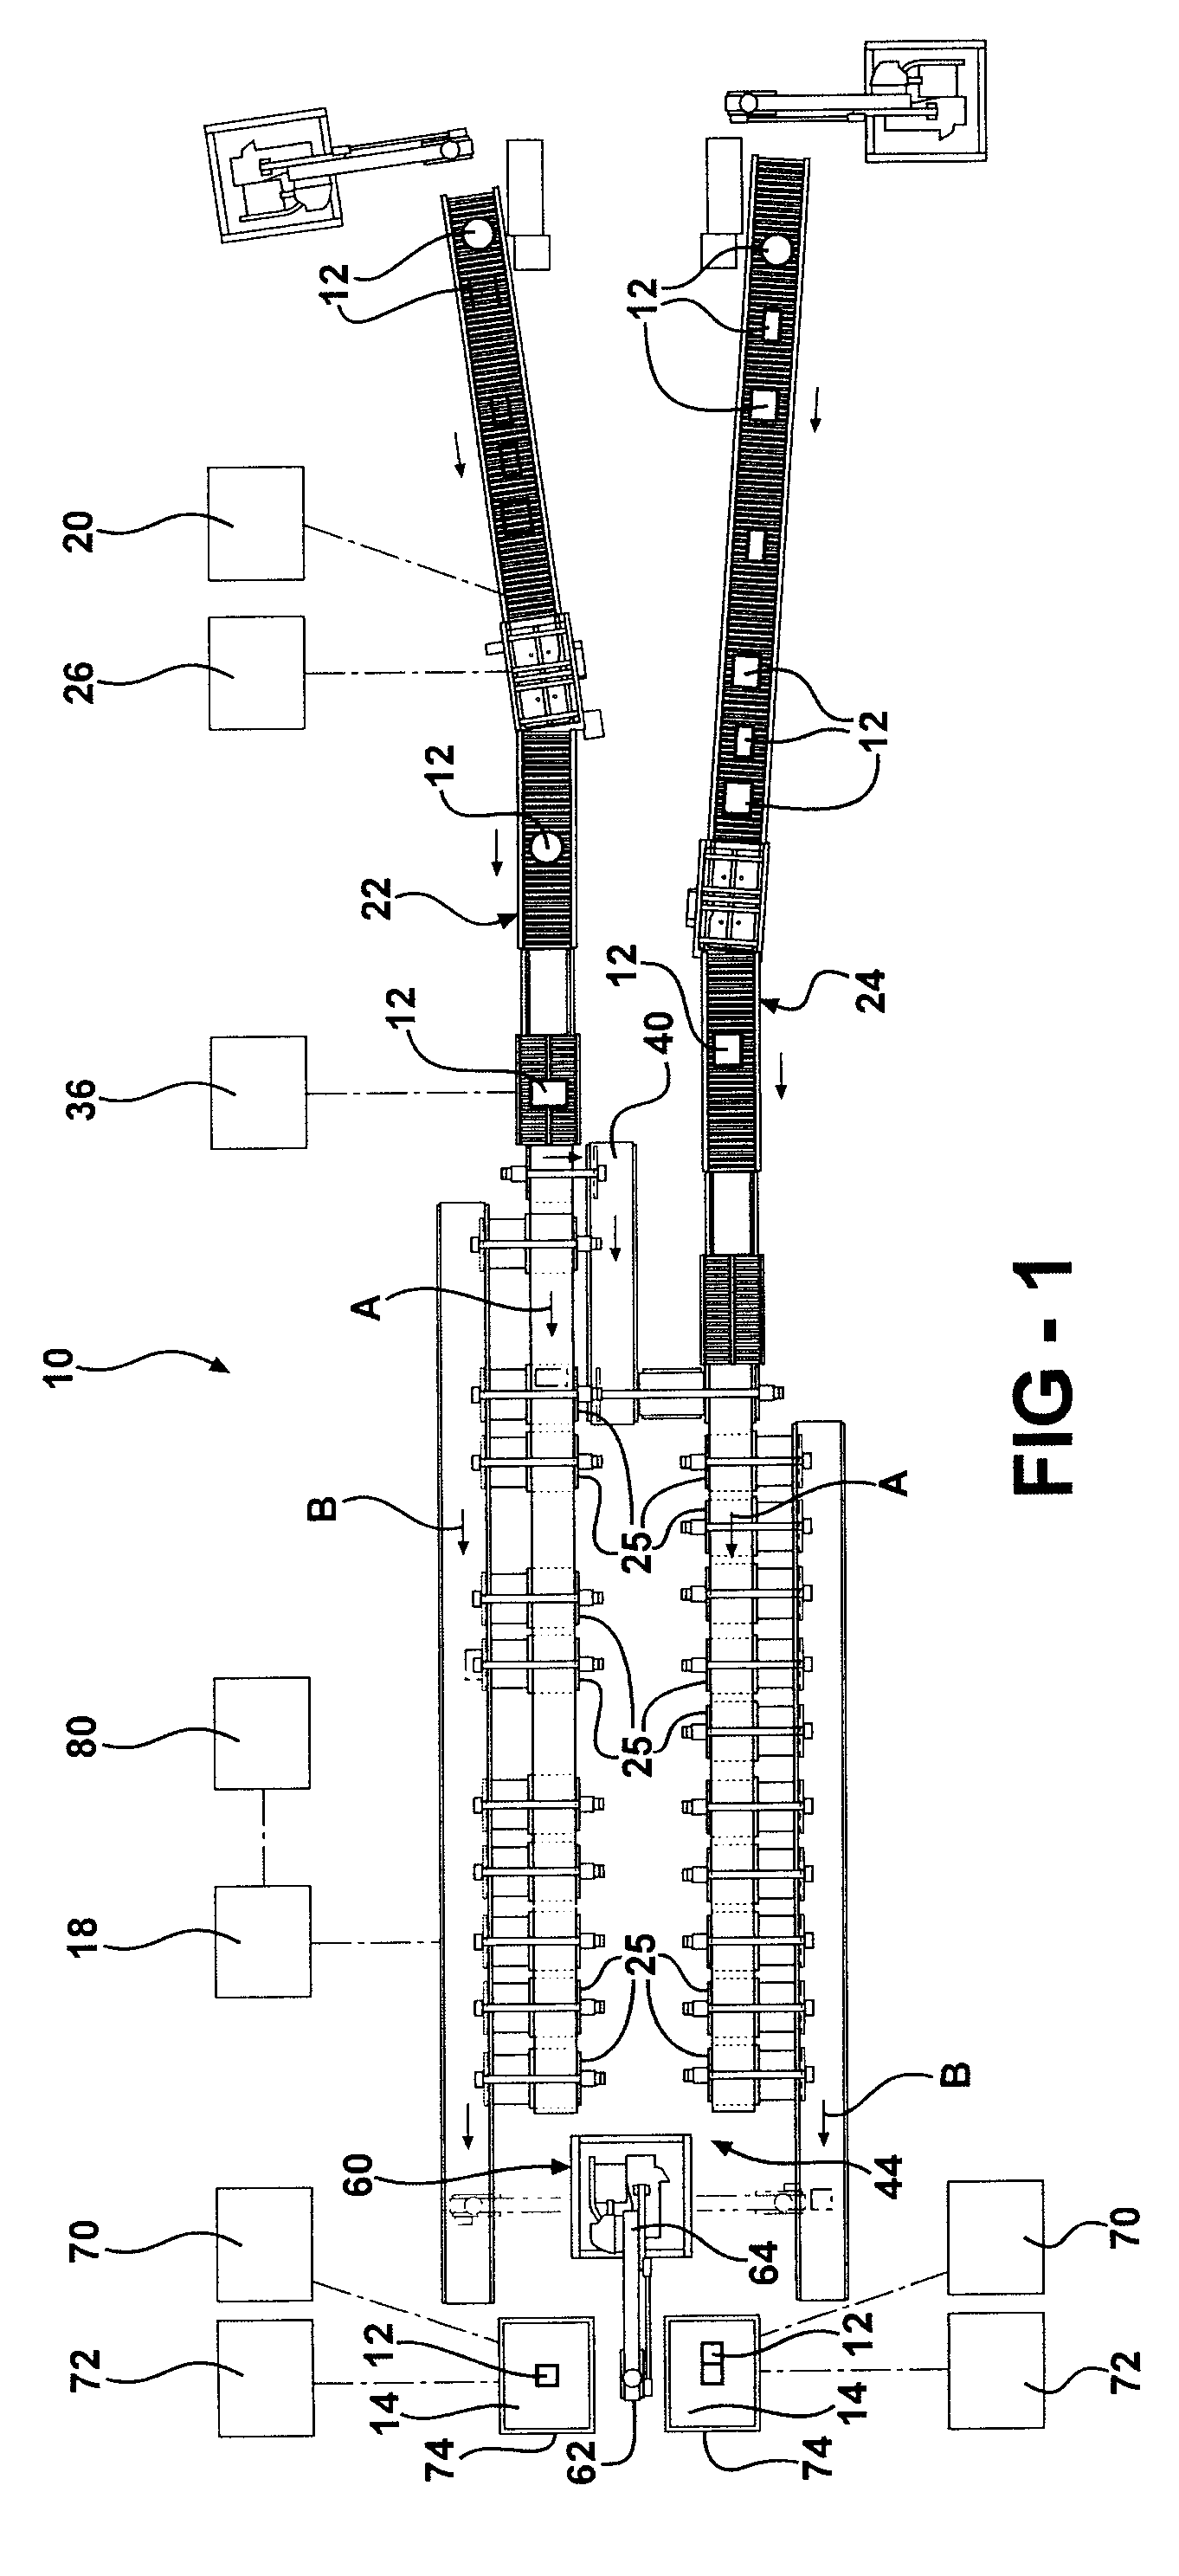 System and method for random mixed palletizing of products